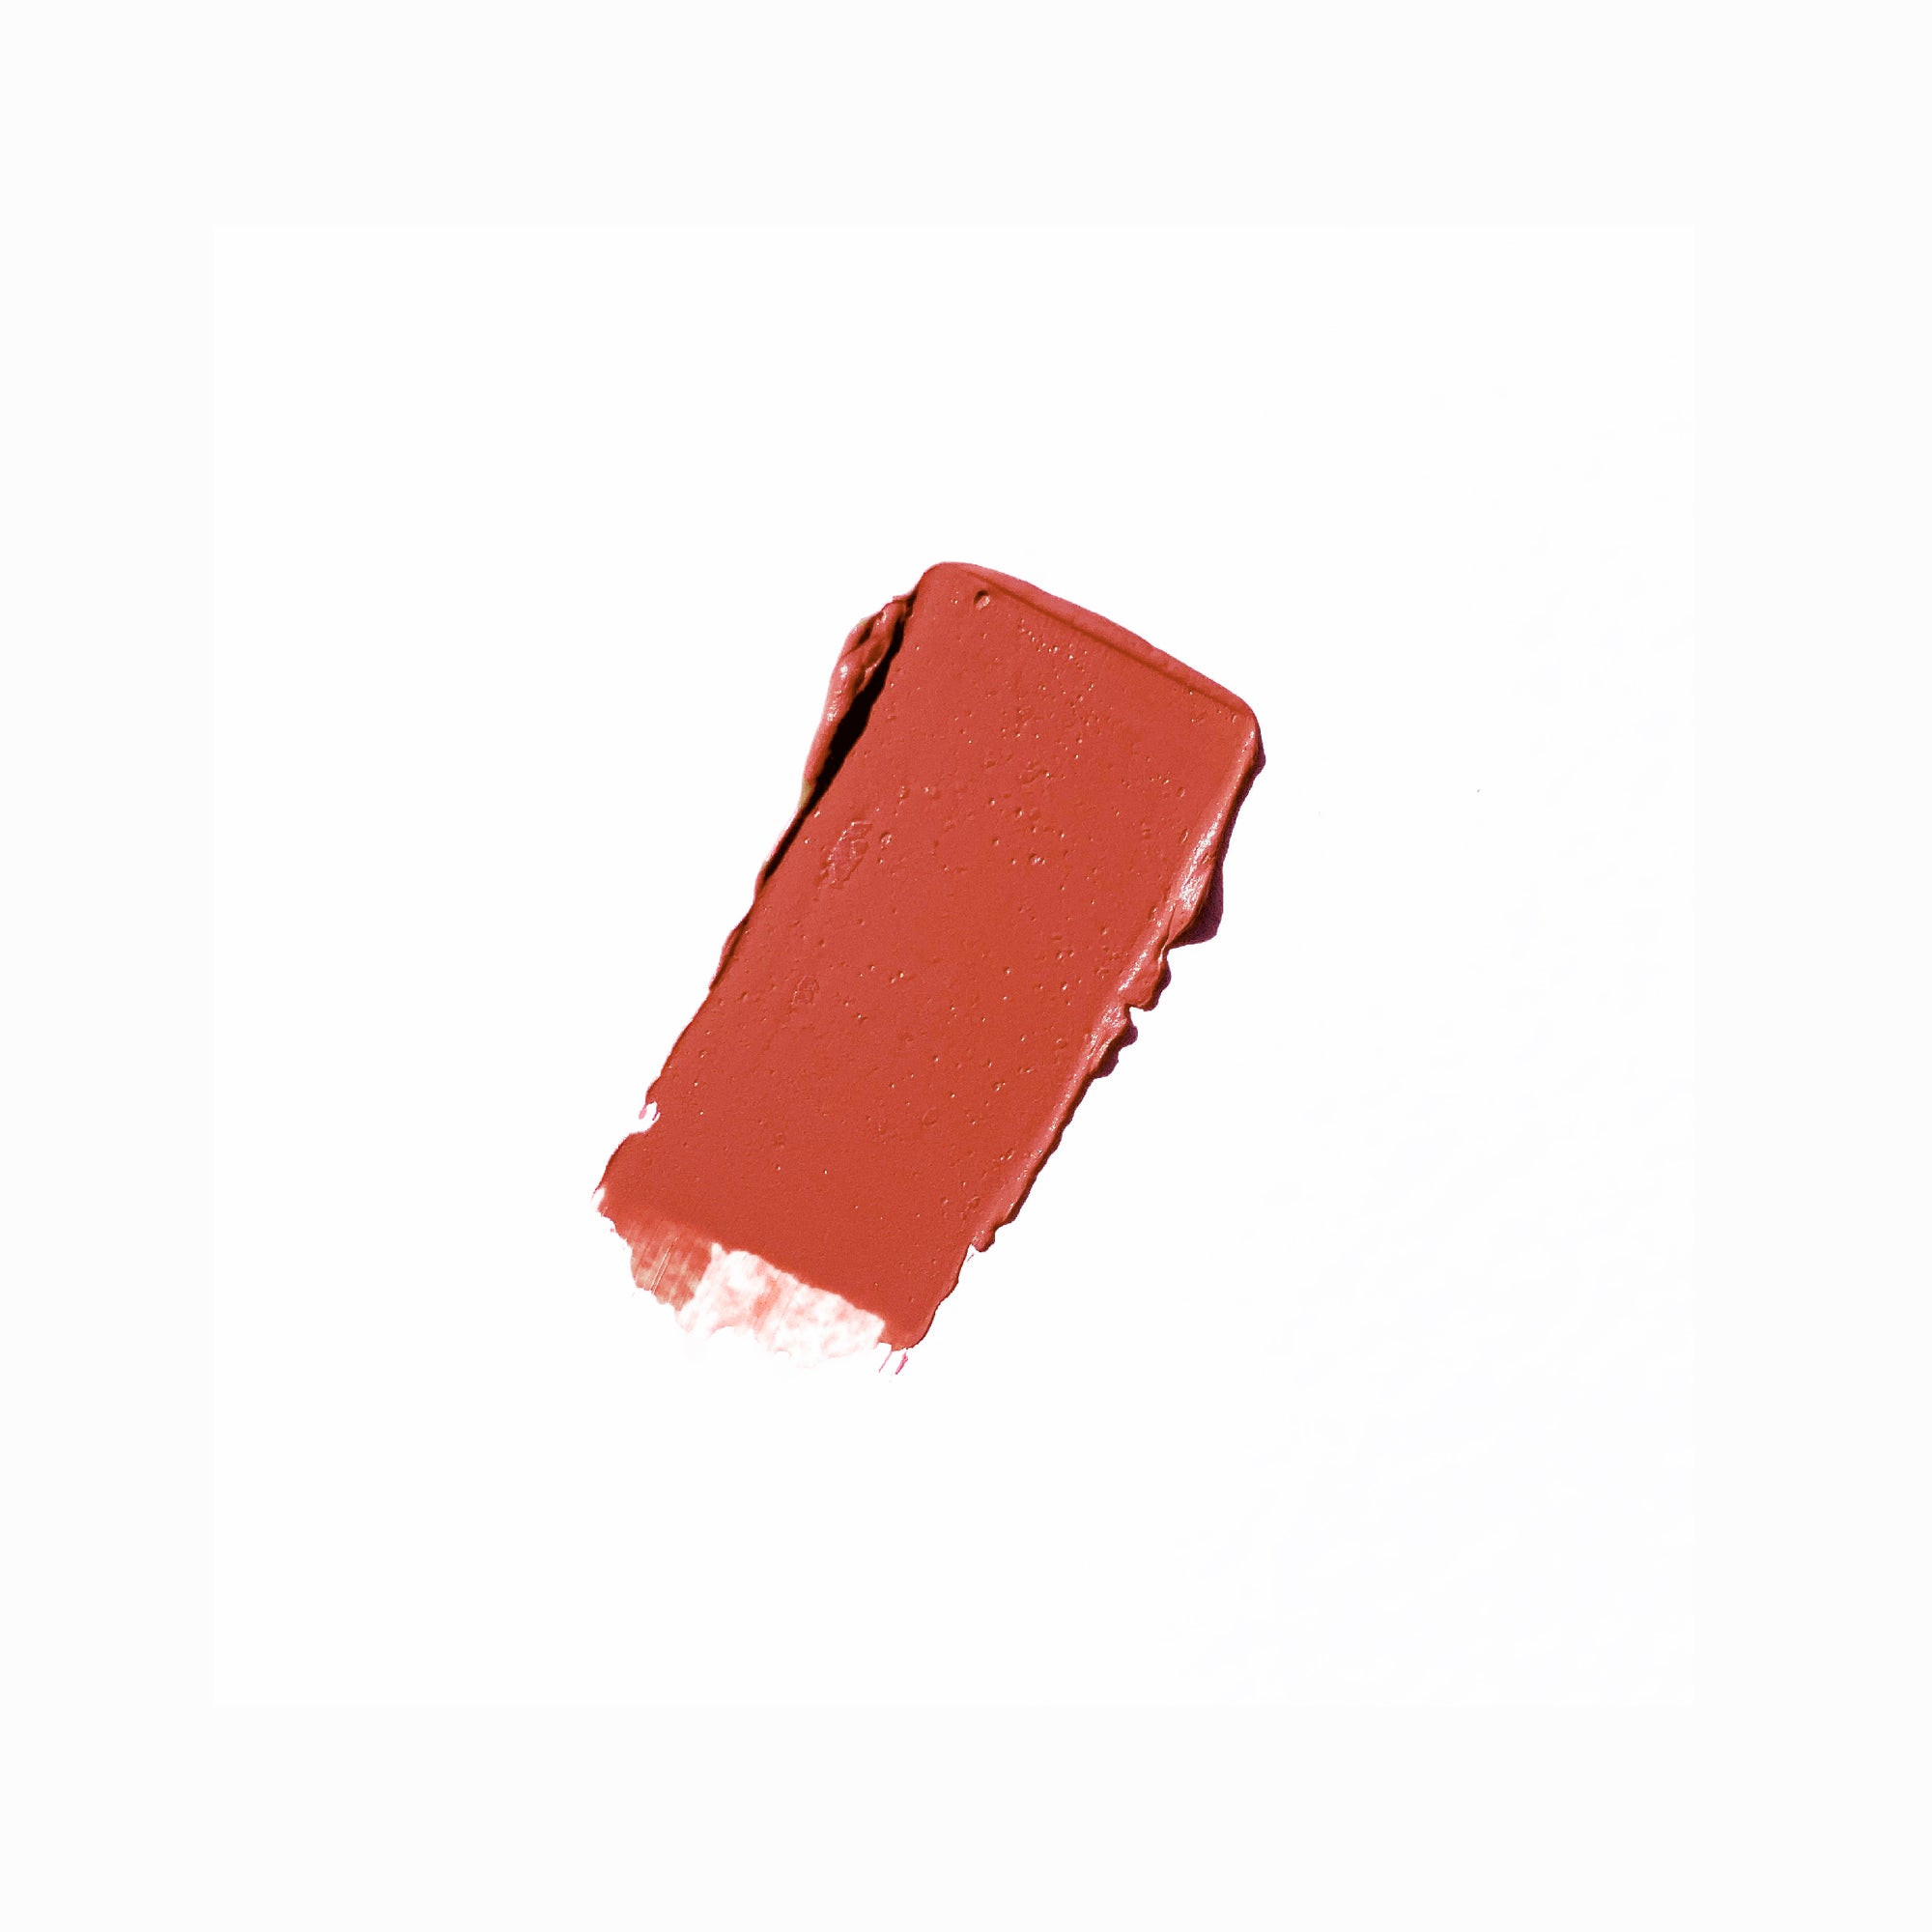 Yulip lipstick in am11, a burnt coral and orange shade in black tube packaging